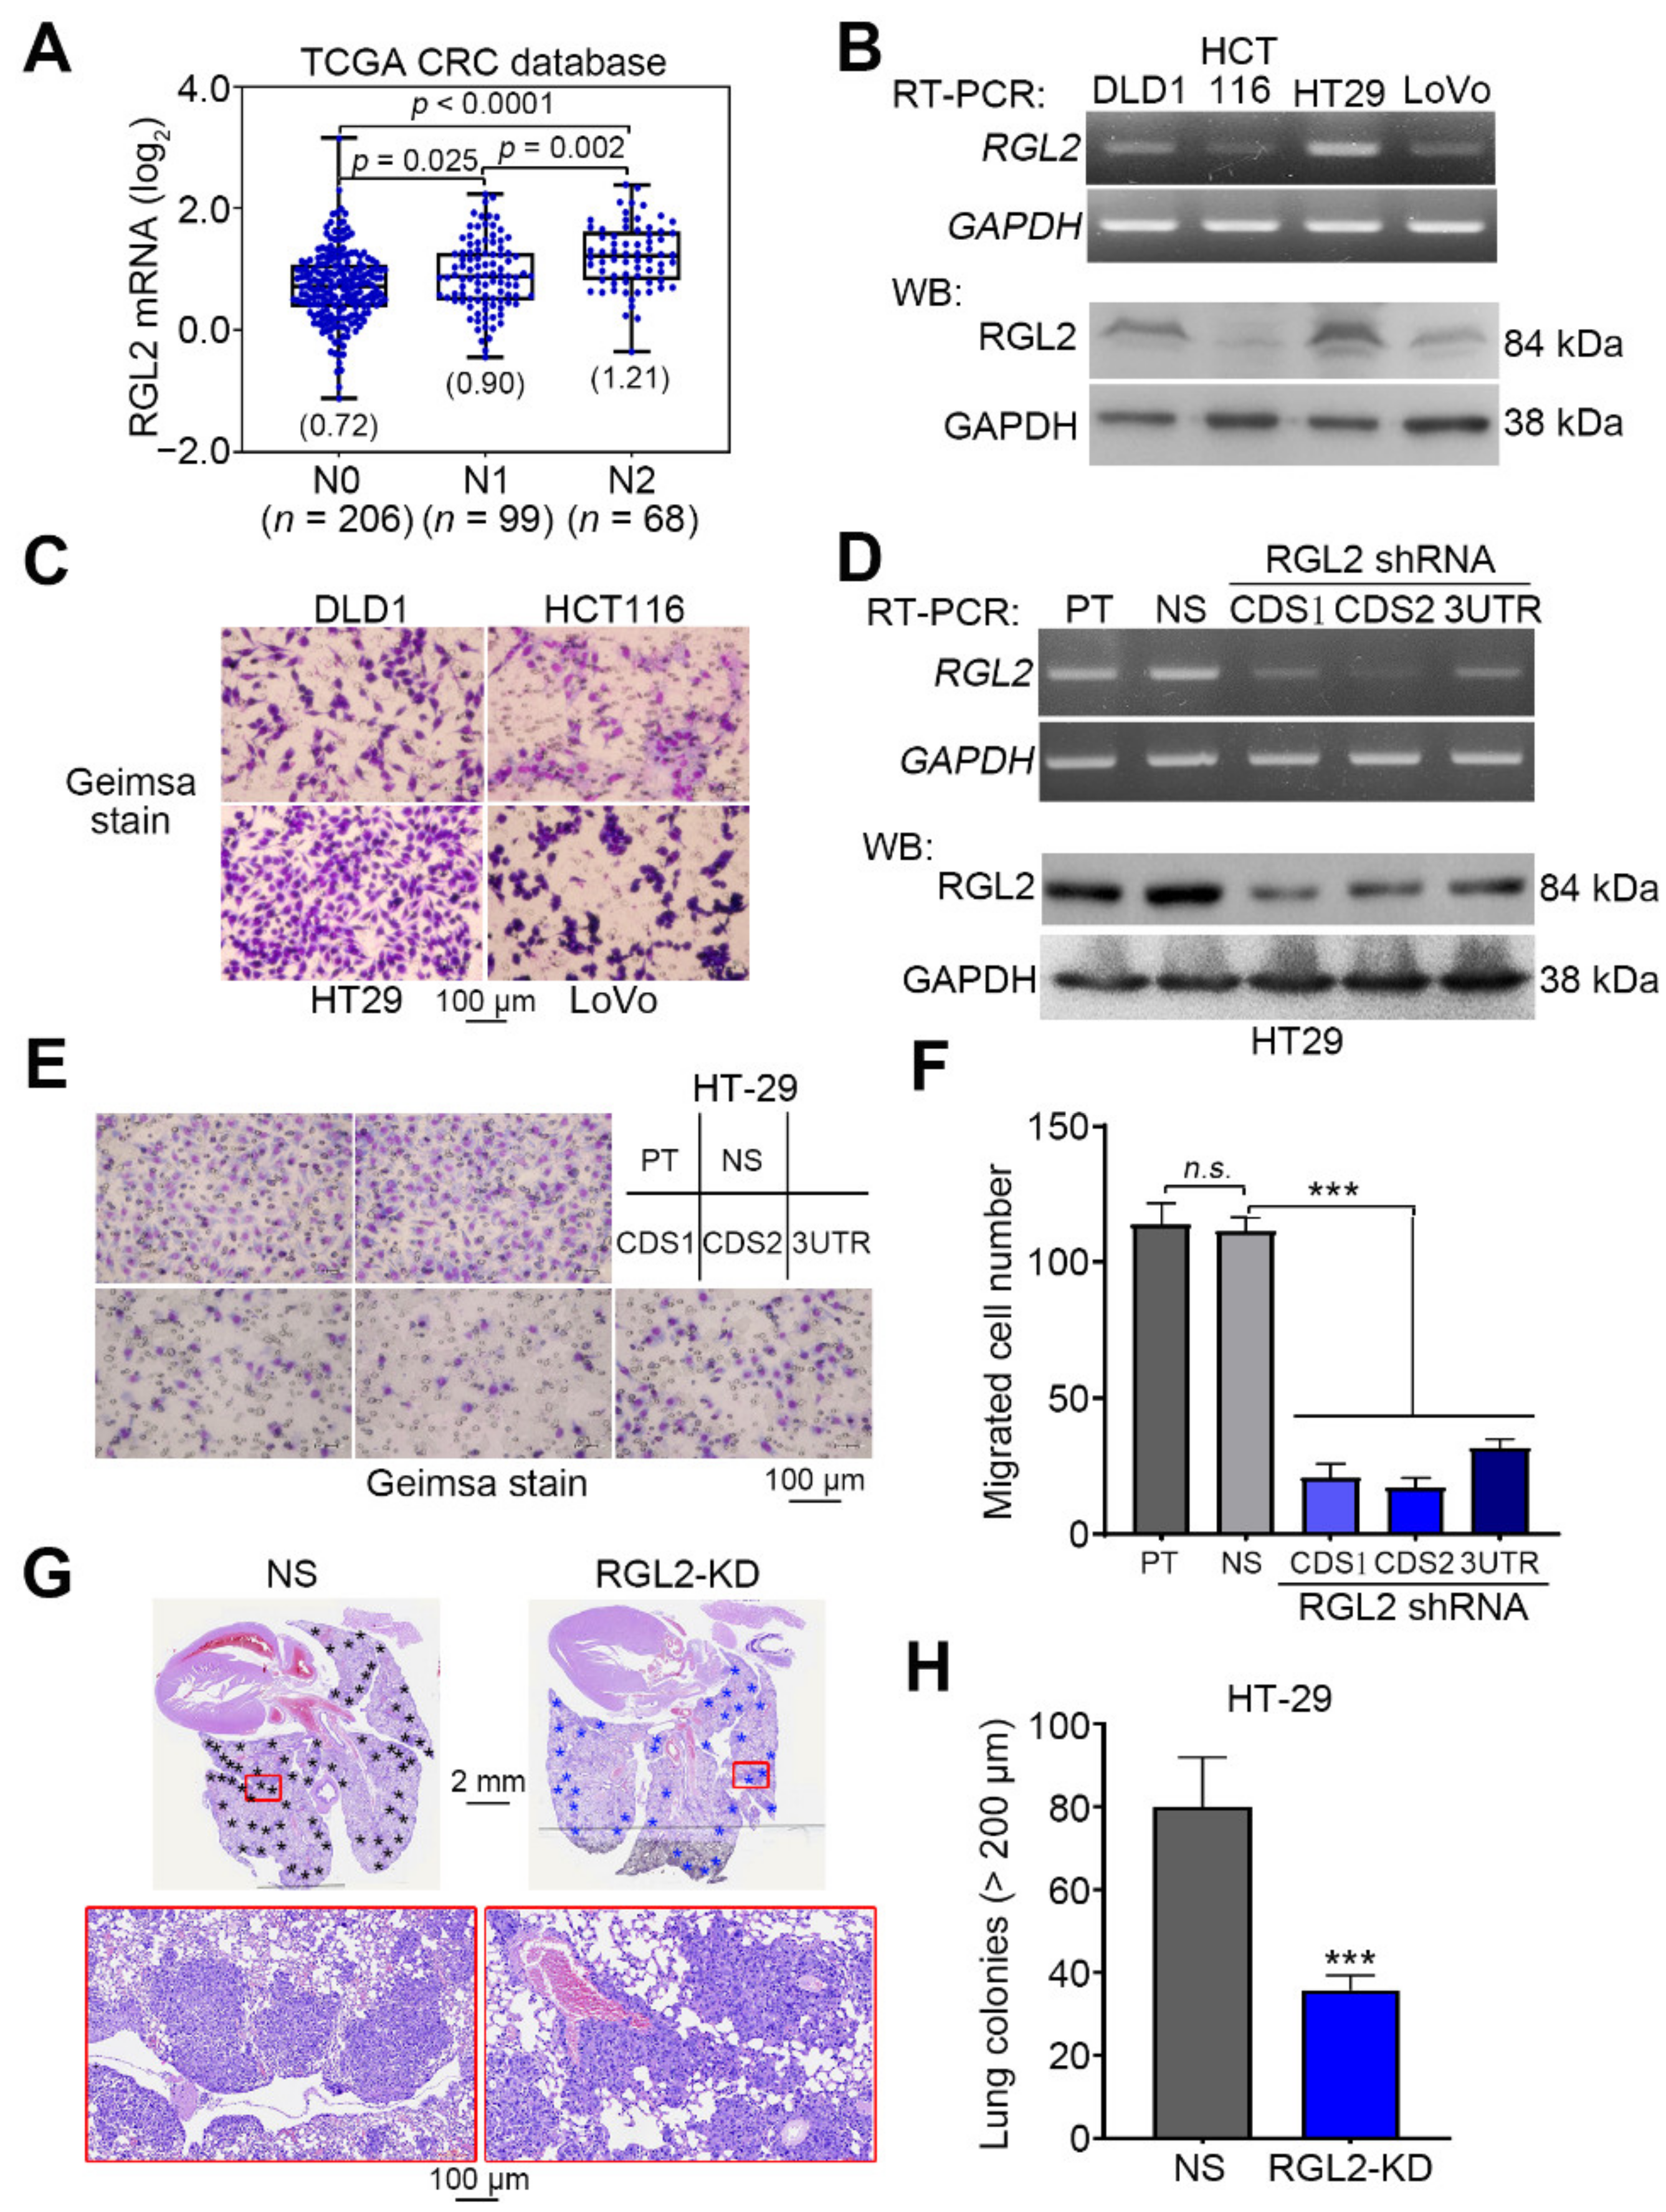 Cancers Free Full Text Rgl2 Drives The Metastatic Progression Of Colorectal Cancer Via Preventing The Protein Degradation Of B Catenin And Kras Html